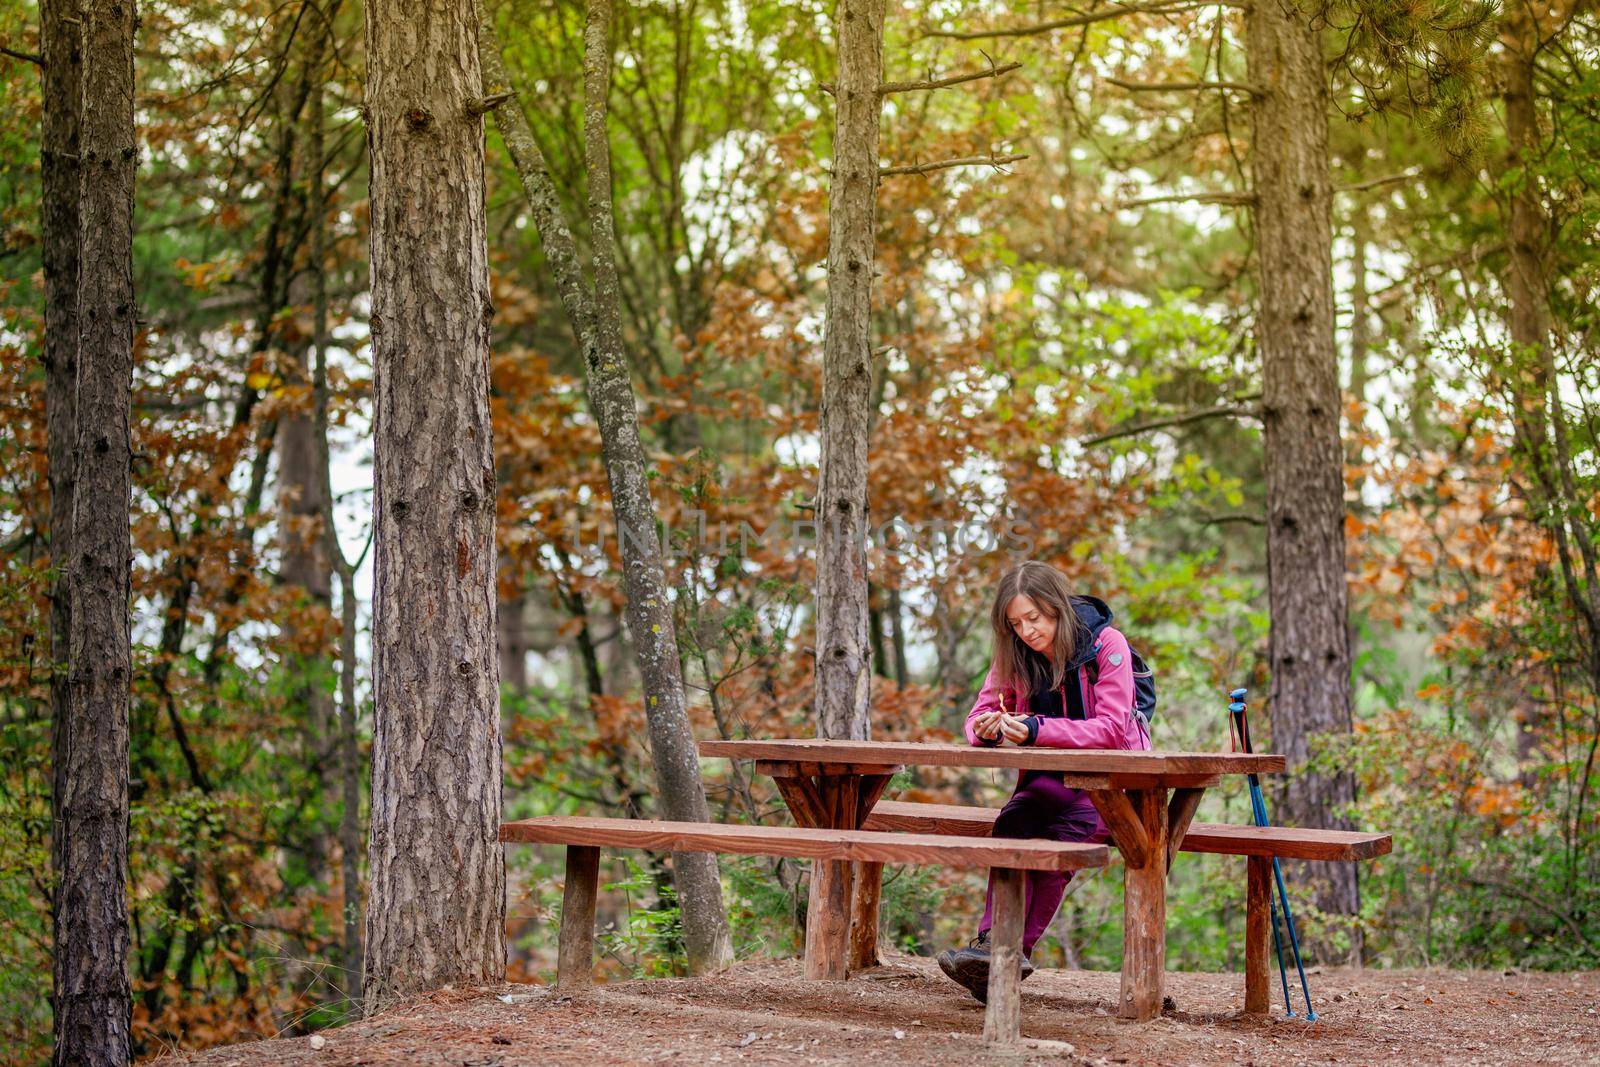 Hiker girl resting on a bench in the forest. Backpacker with pink jacket in nature. by kokimk